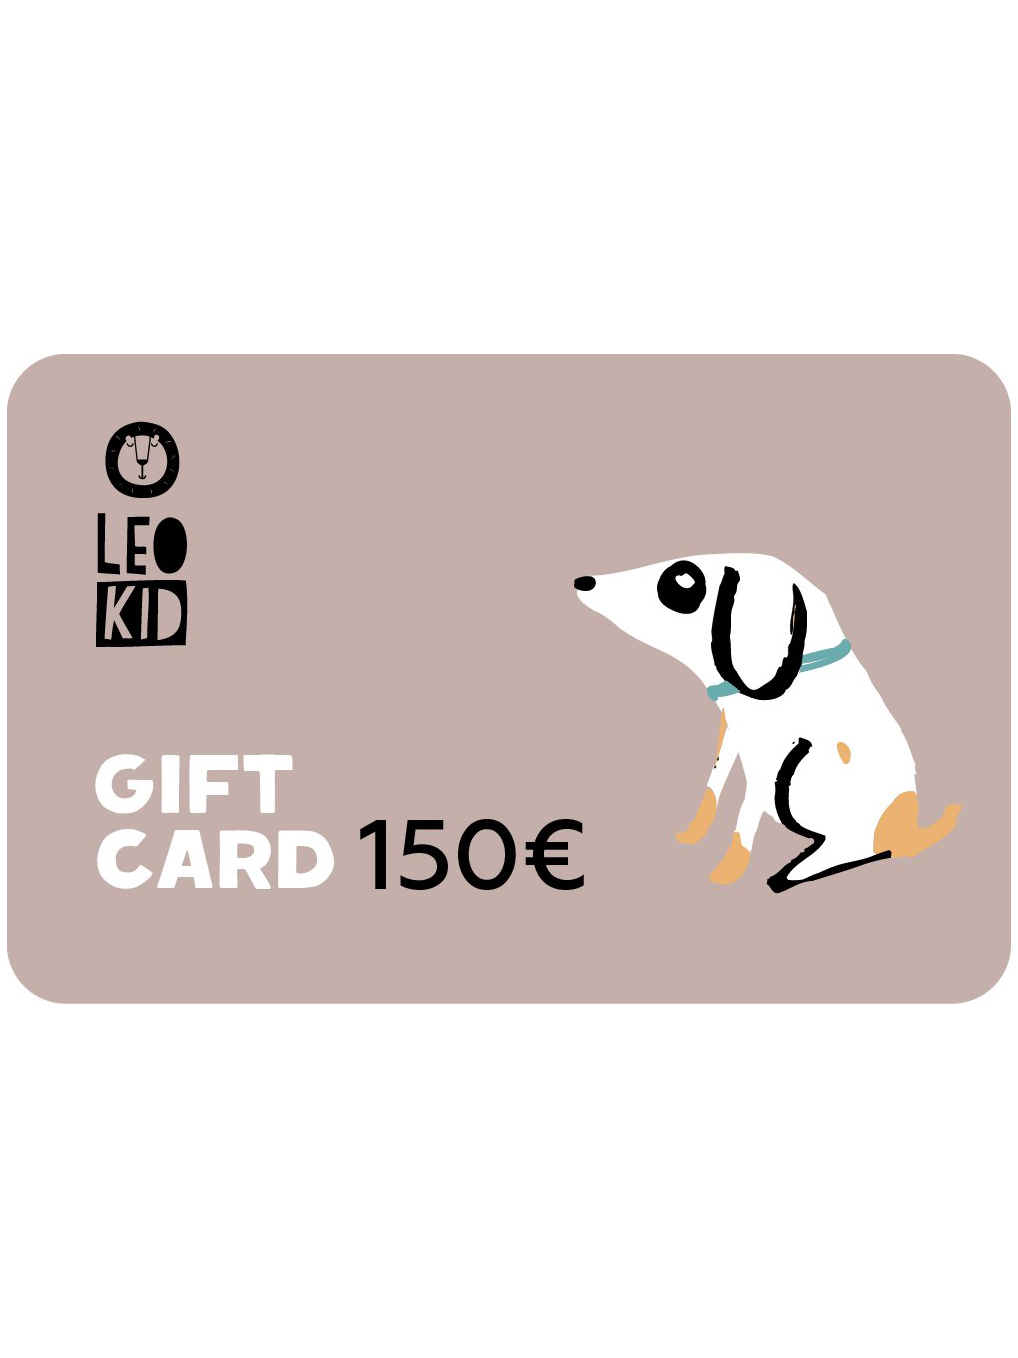 Electronic gift card 150€